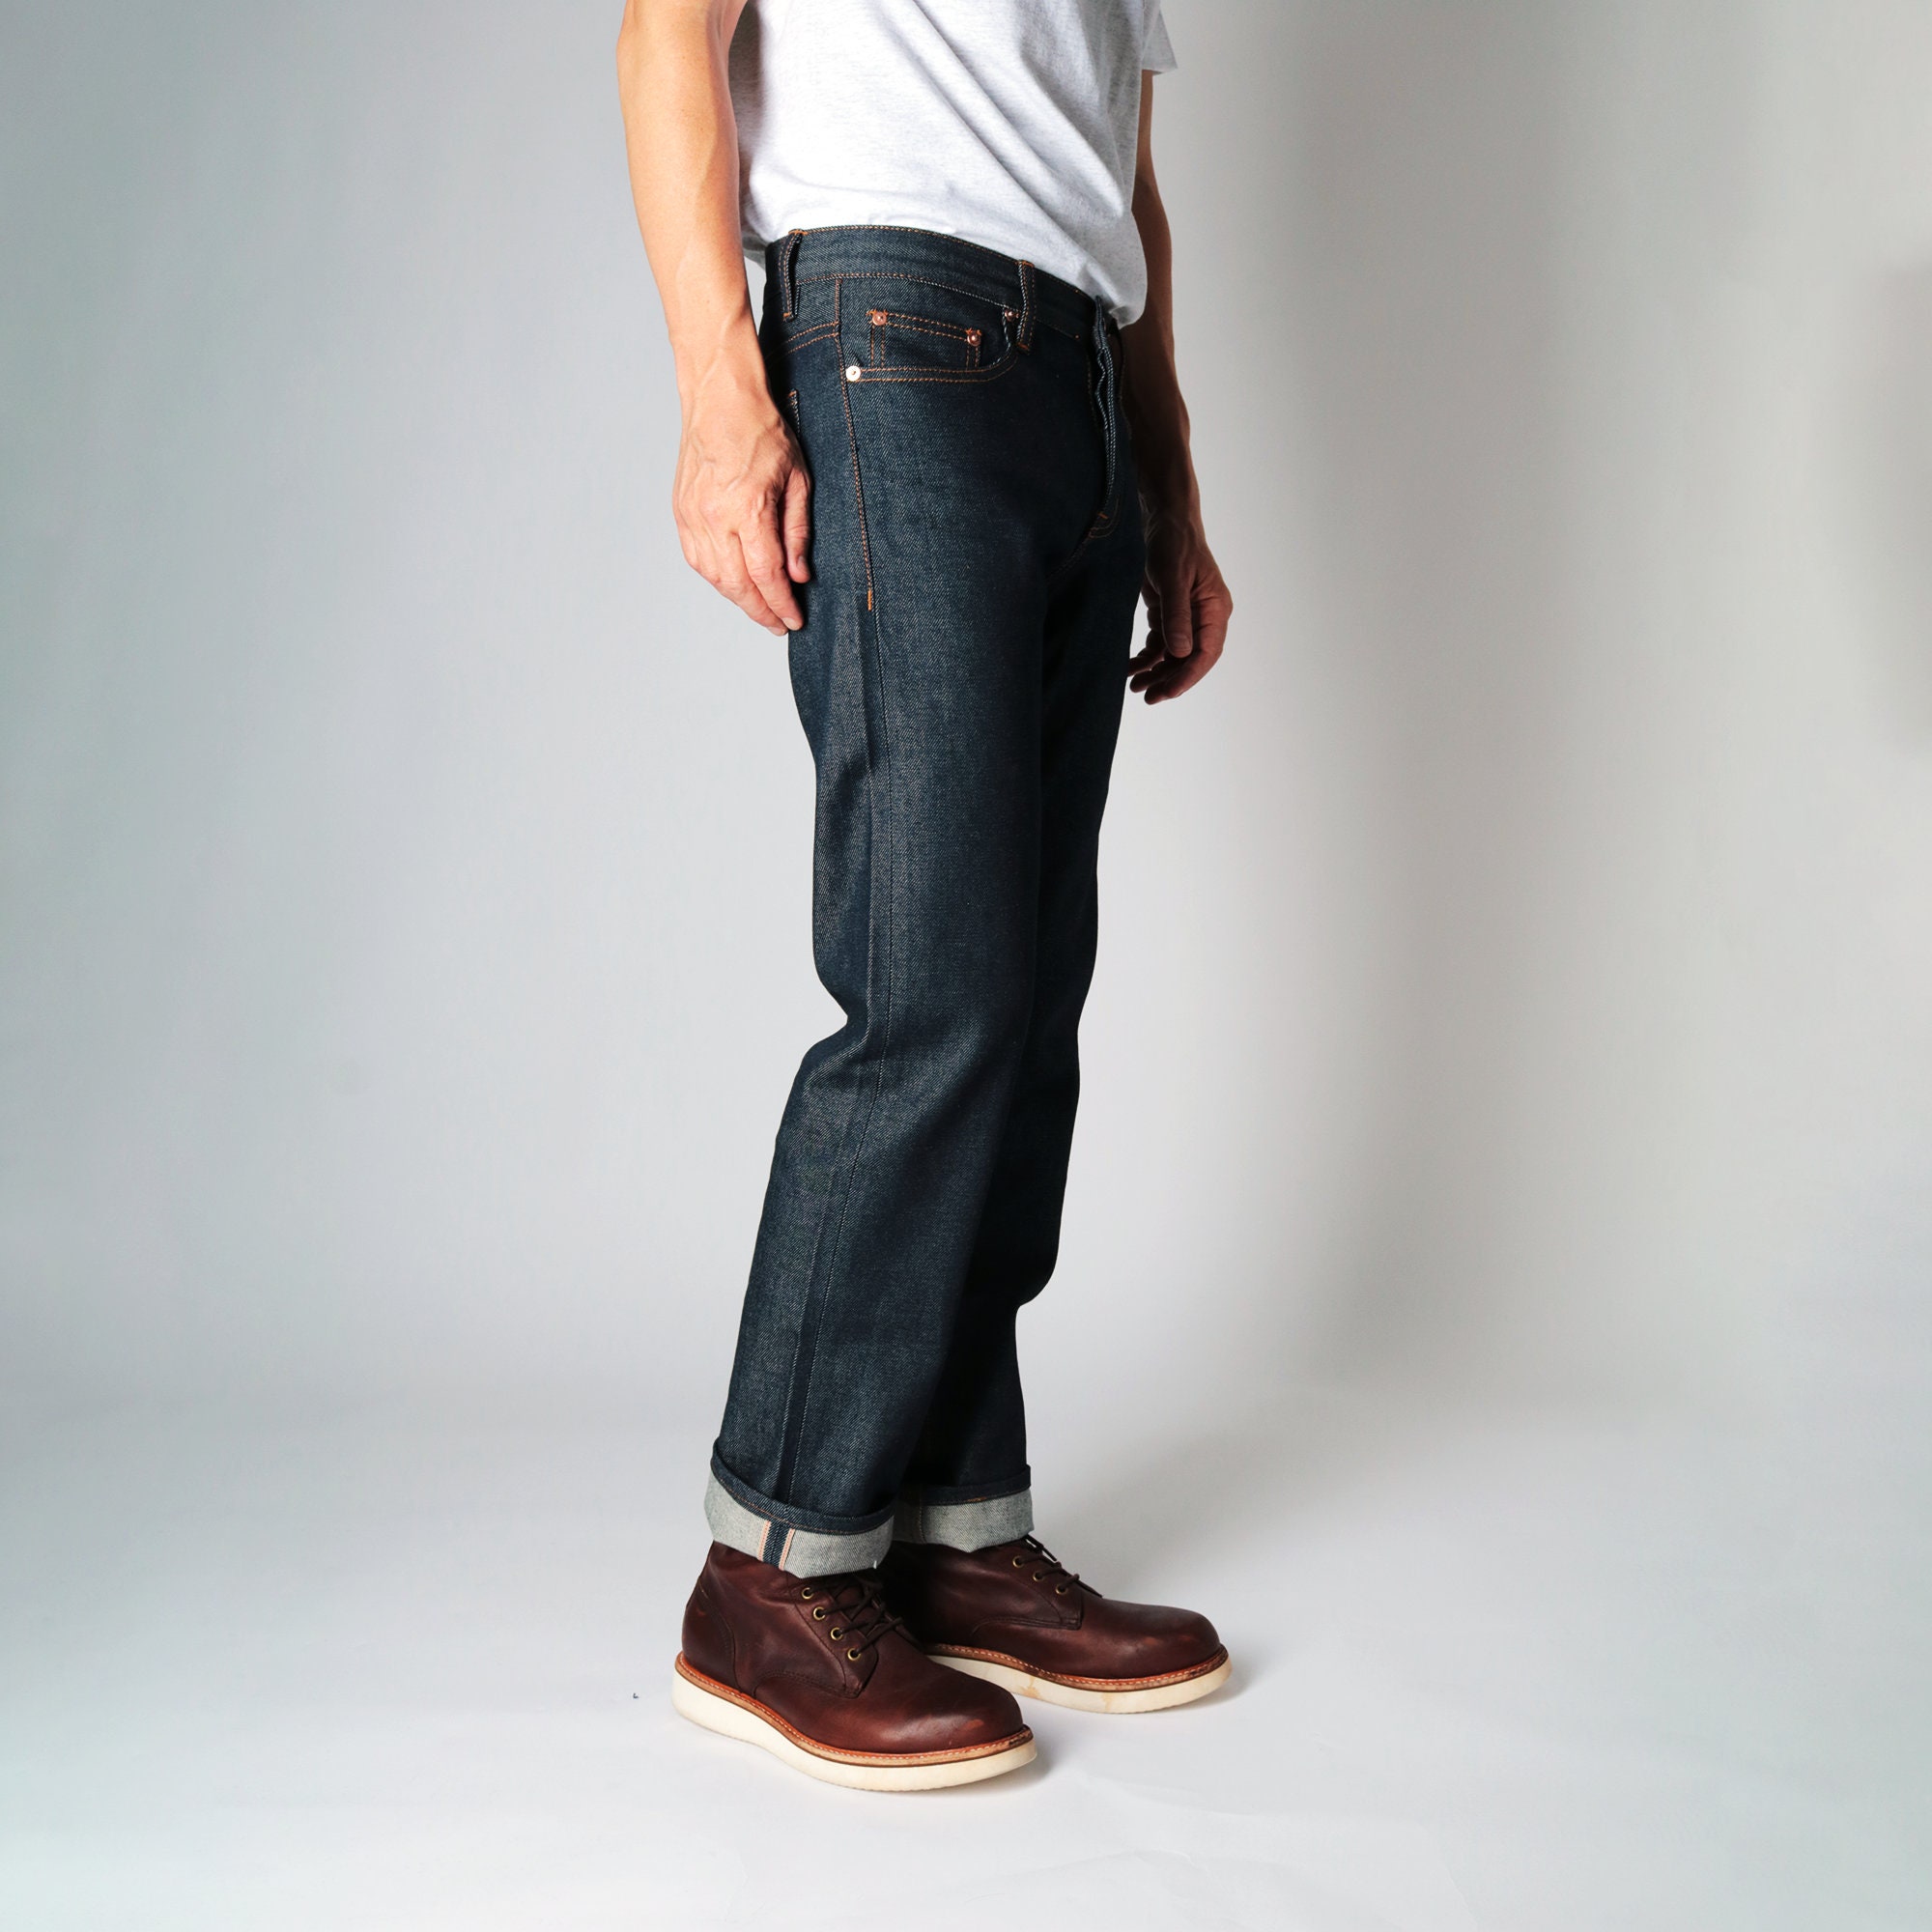 Handcrafted Custom Bespoke Japanese Selvedge Denim: Exquisite Tailoring and  Unmatched Quality, Made to Order -  Israel